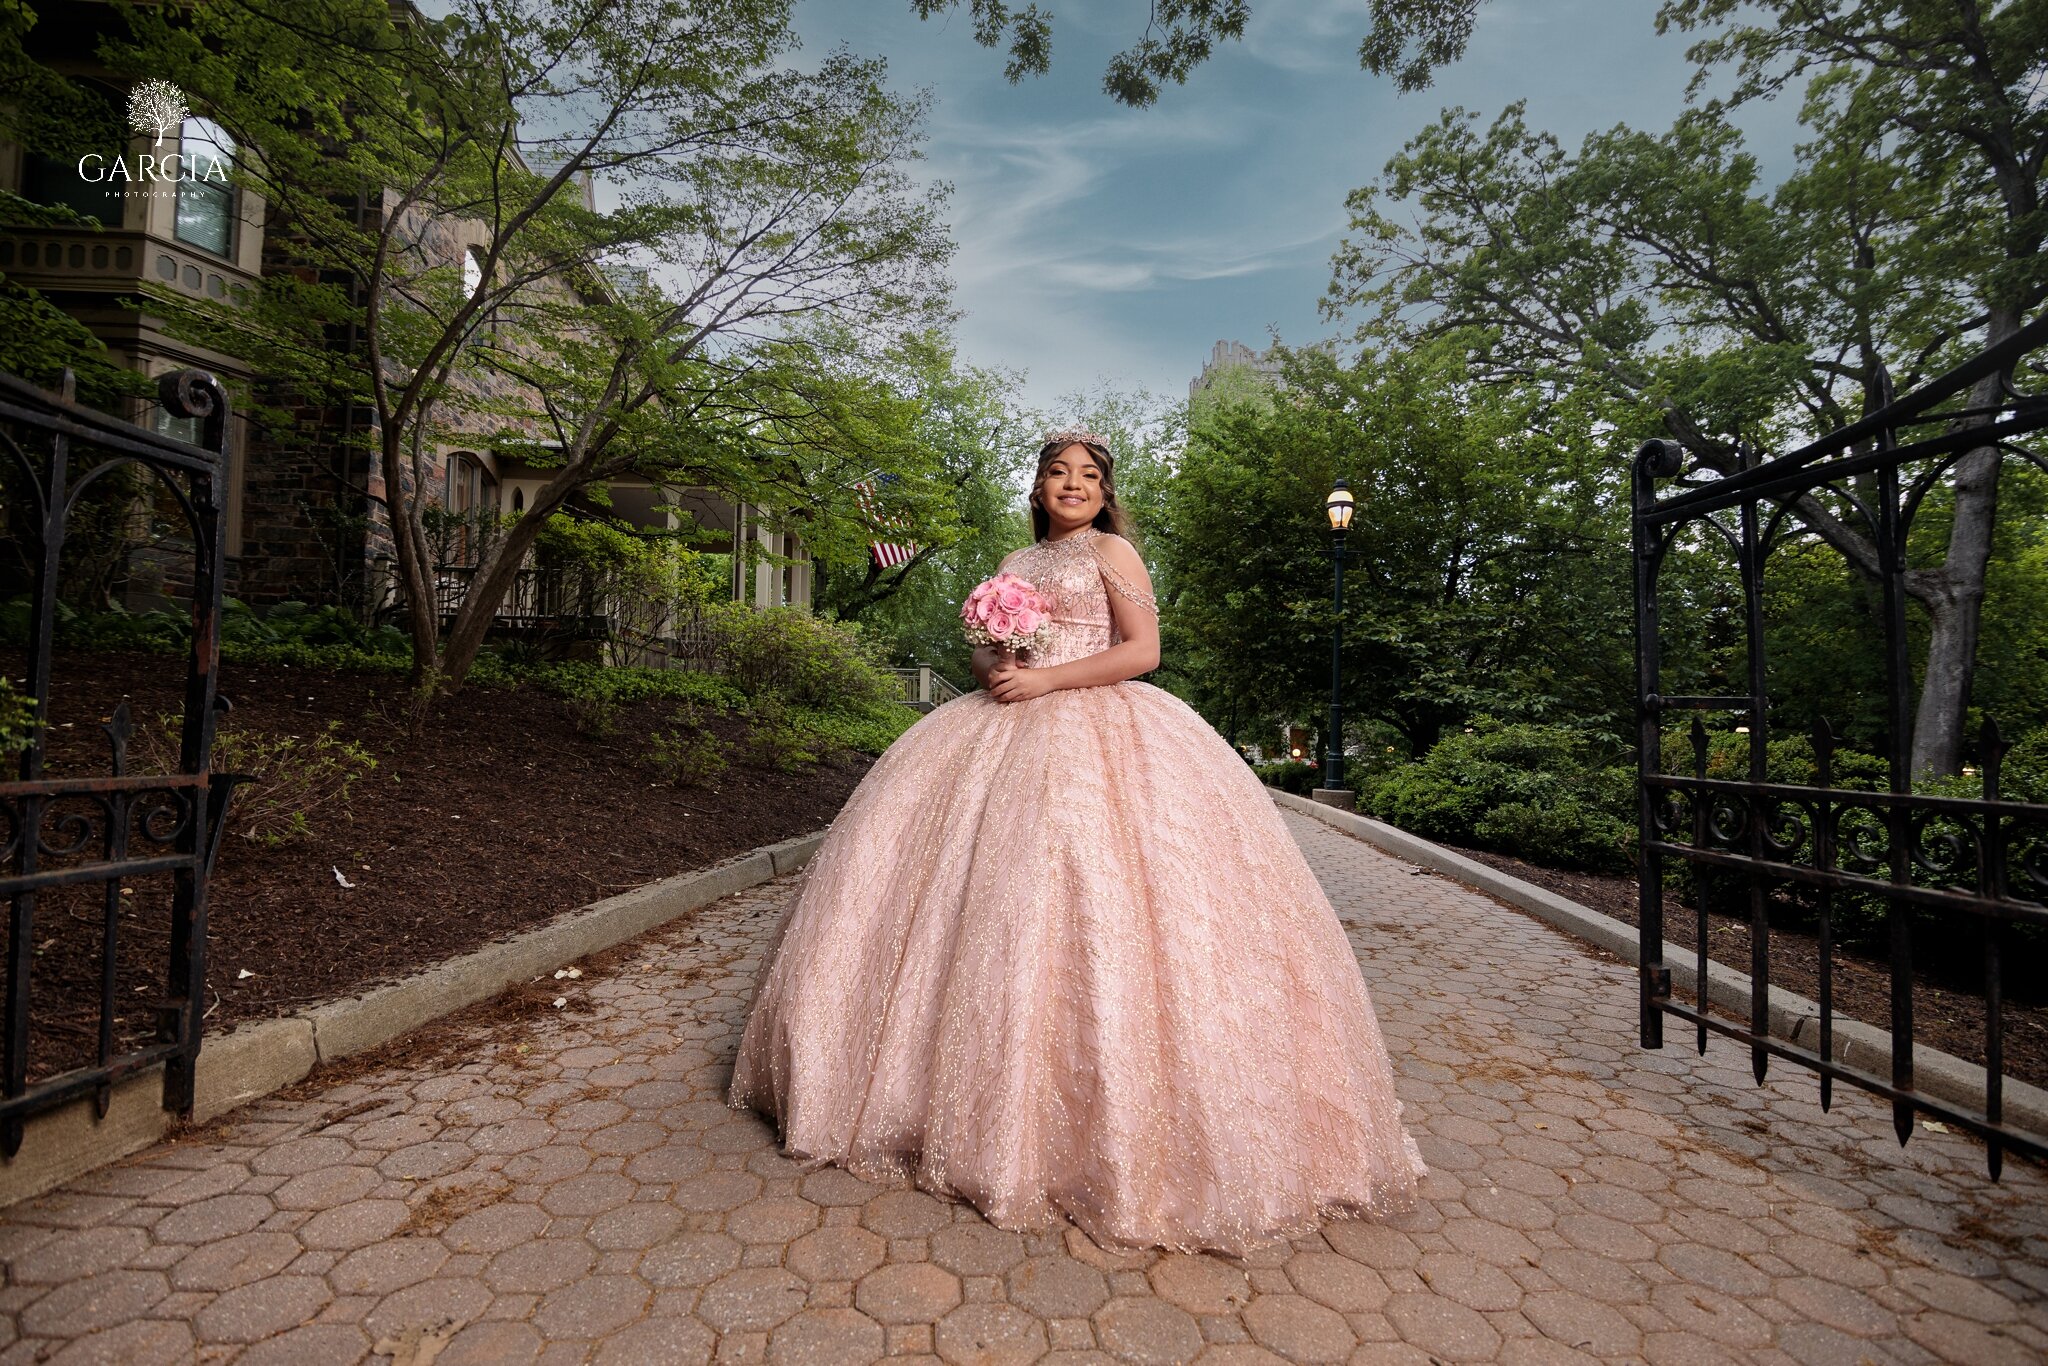 Alana-Quince-Session-Garcia-Photography-2306-1.jpg